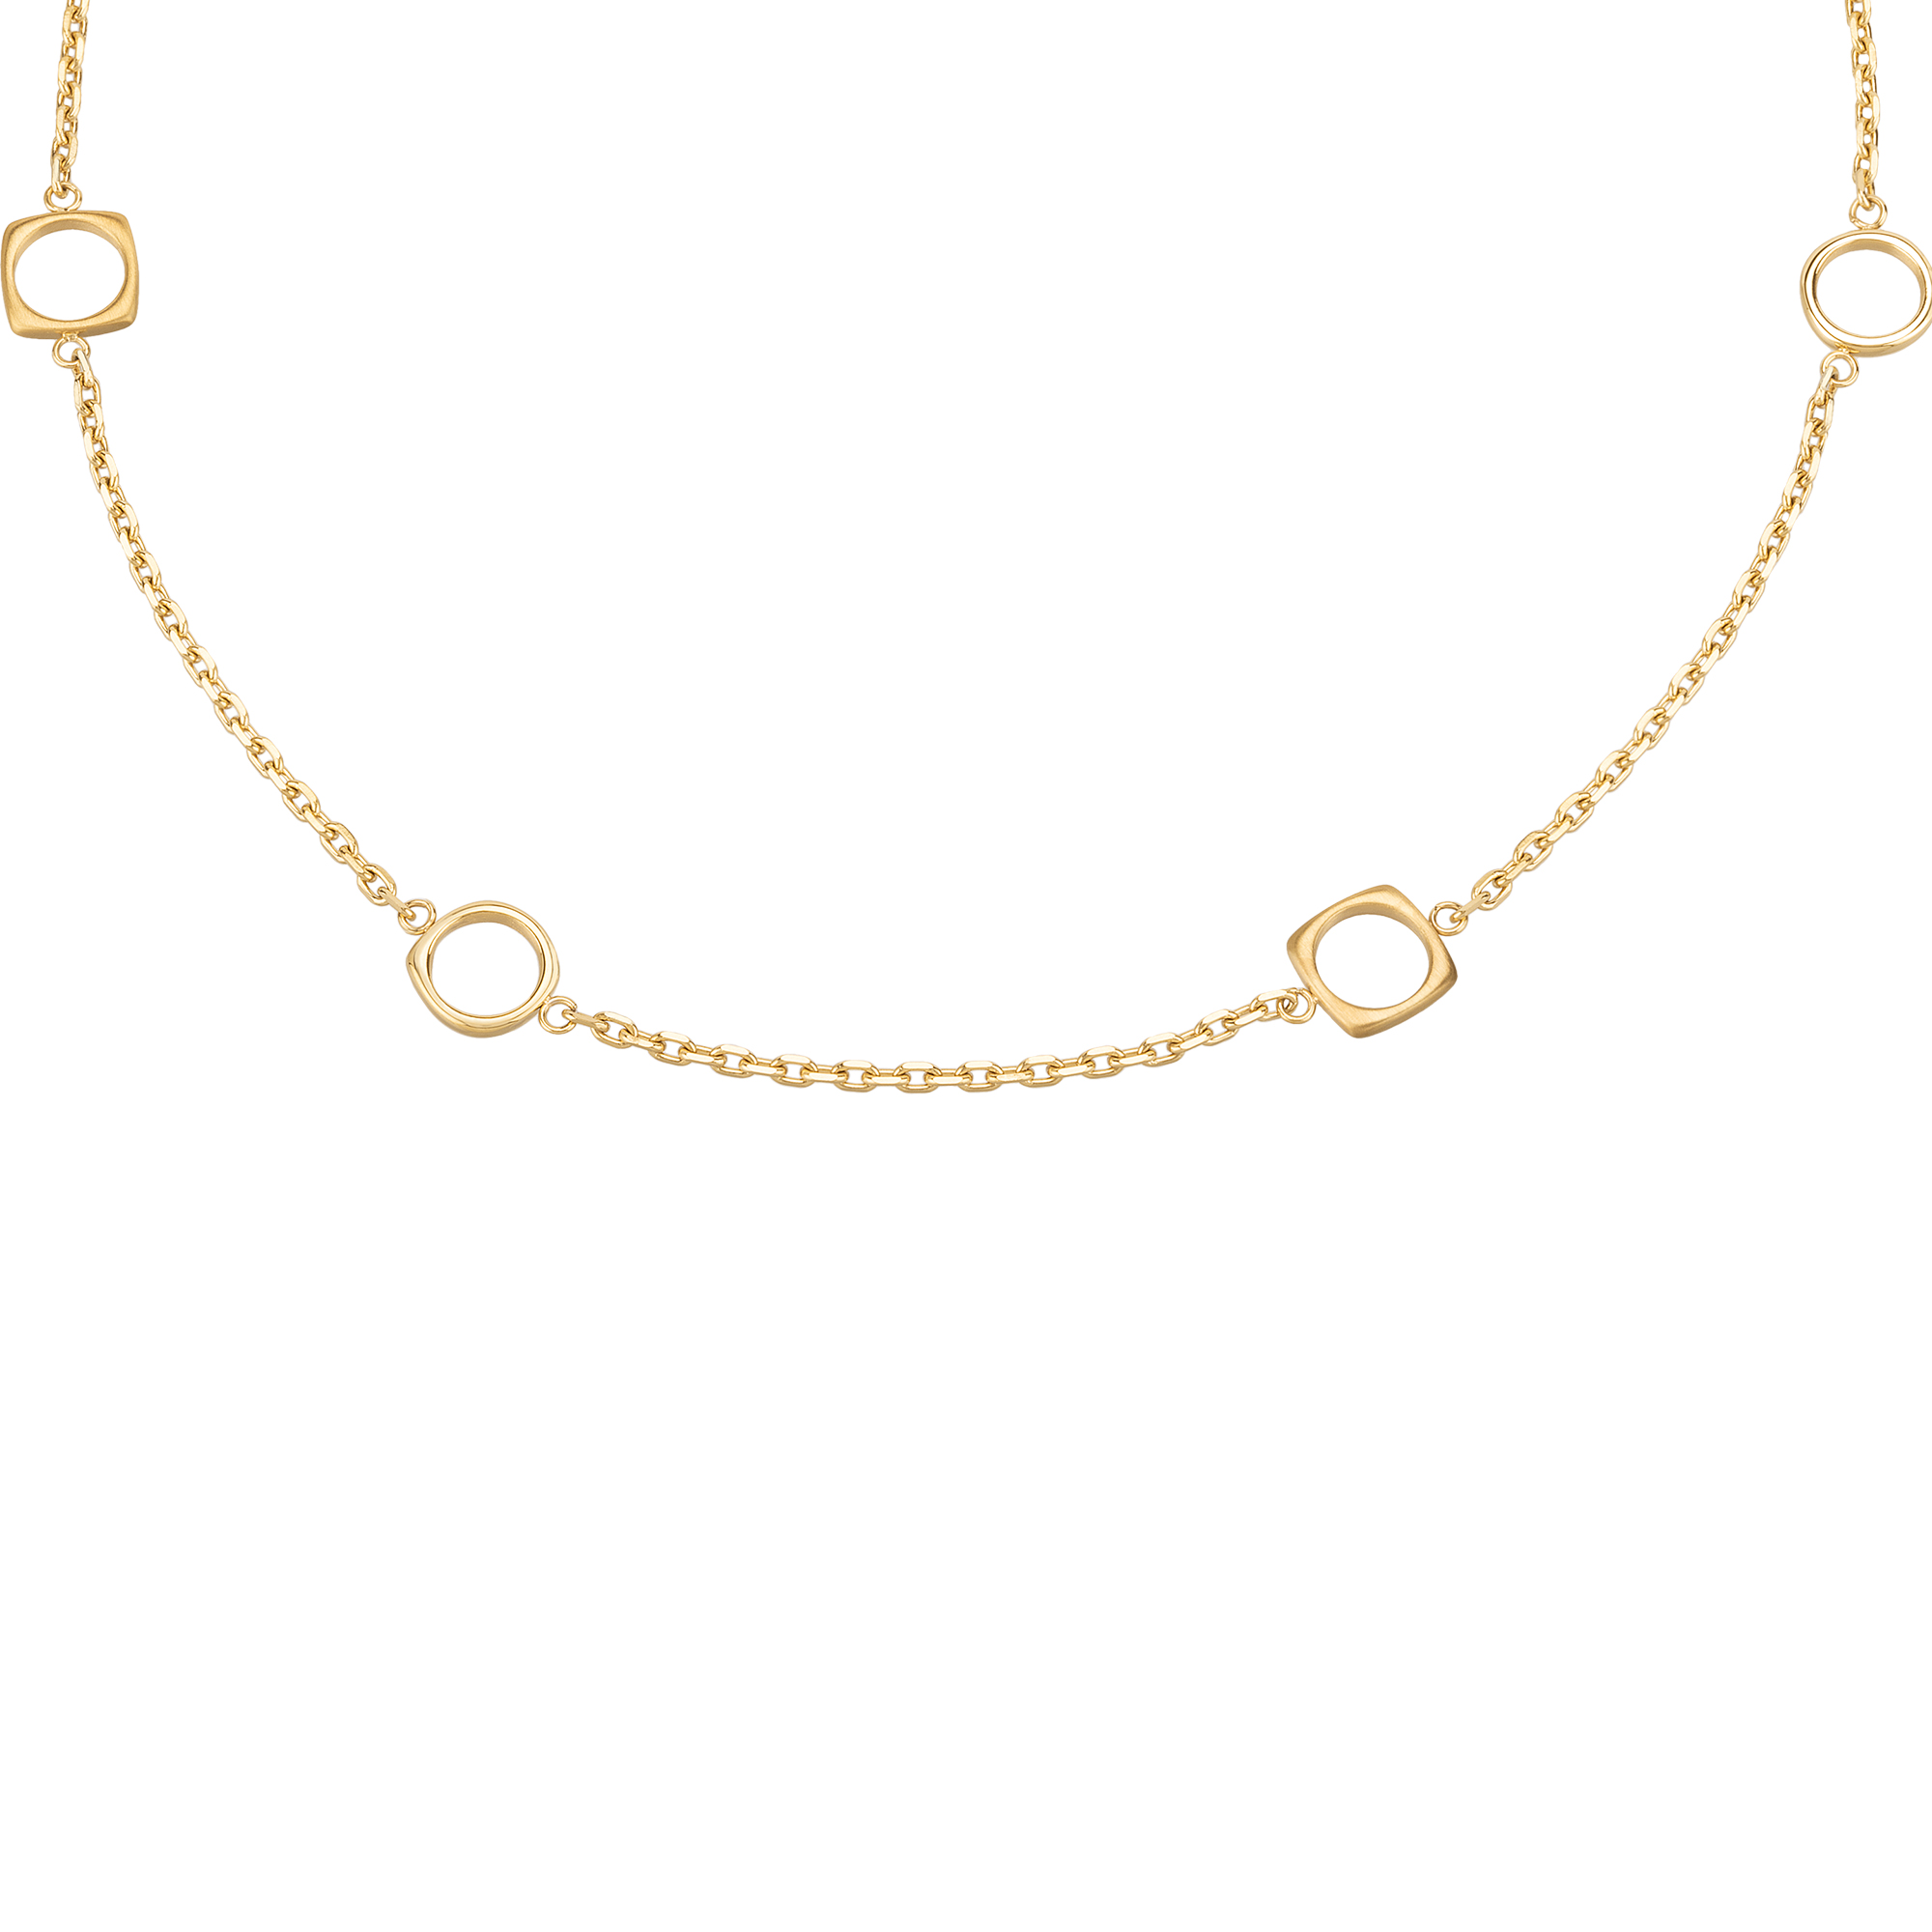 NEW TETRA - IP GOLD STEEL NECKLACE WITH MICRO-CHAIN - 2 - TJ3168 | Breil